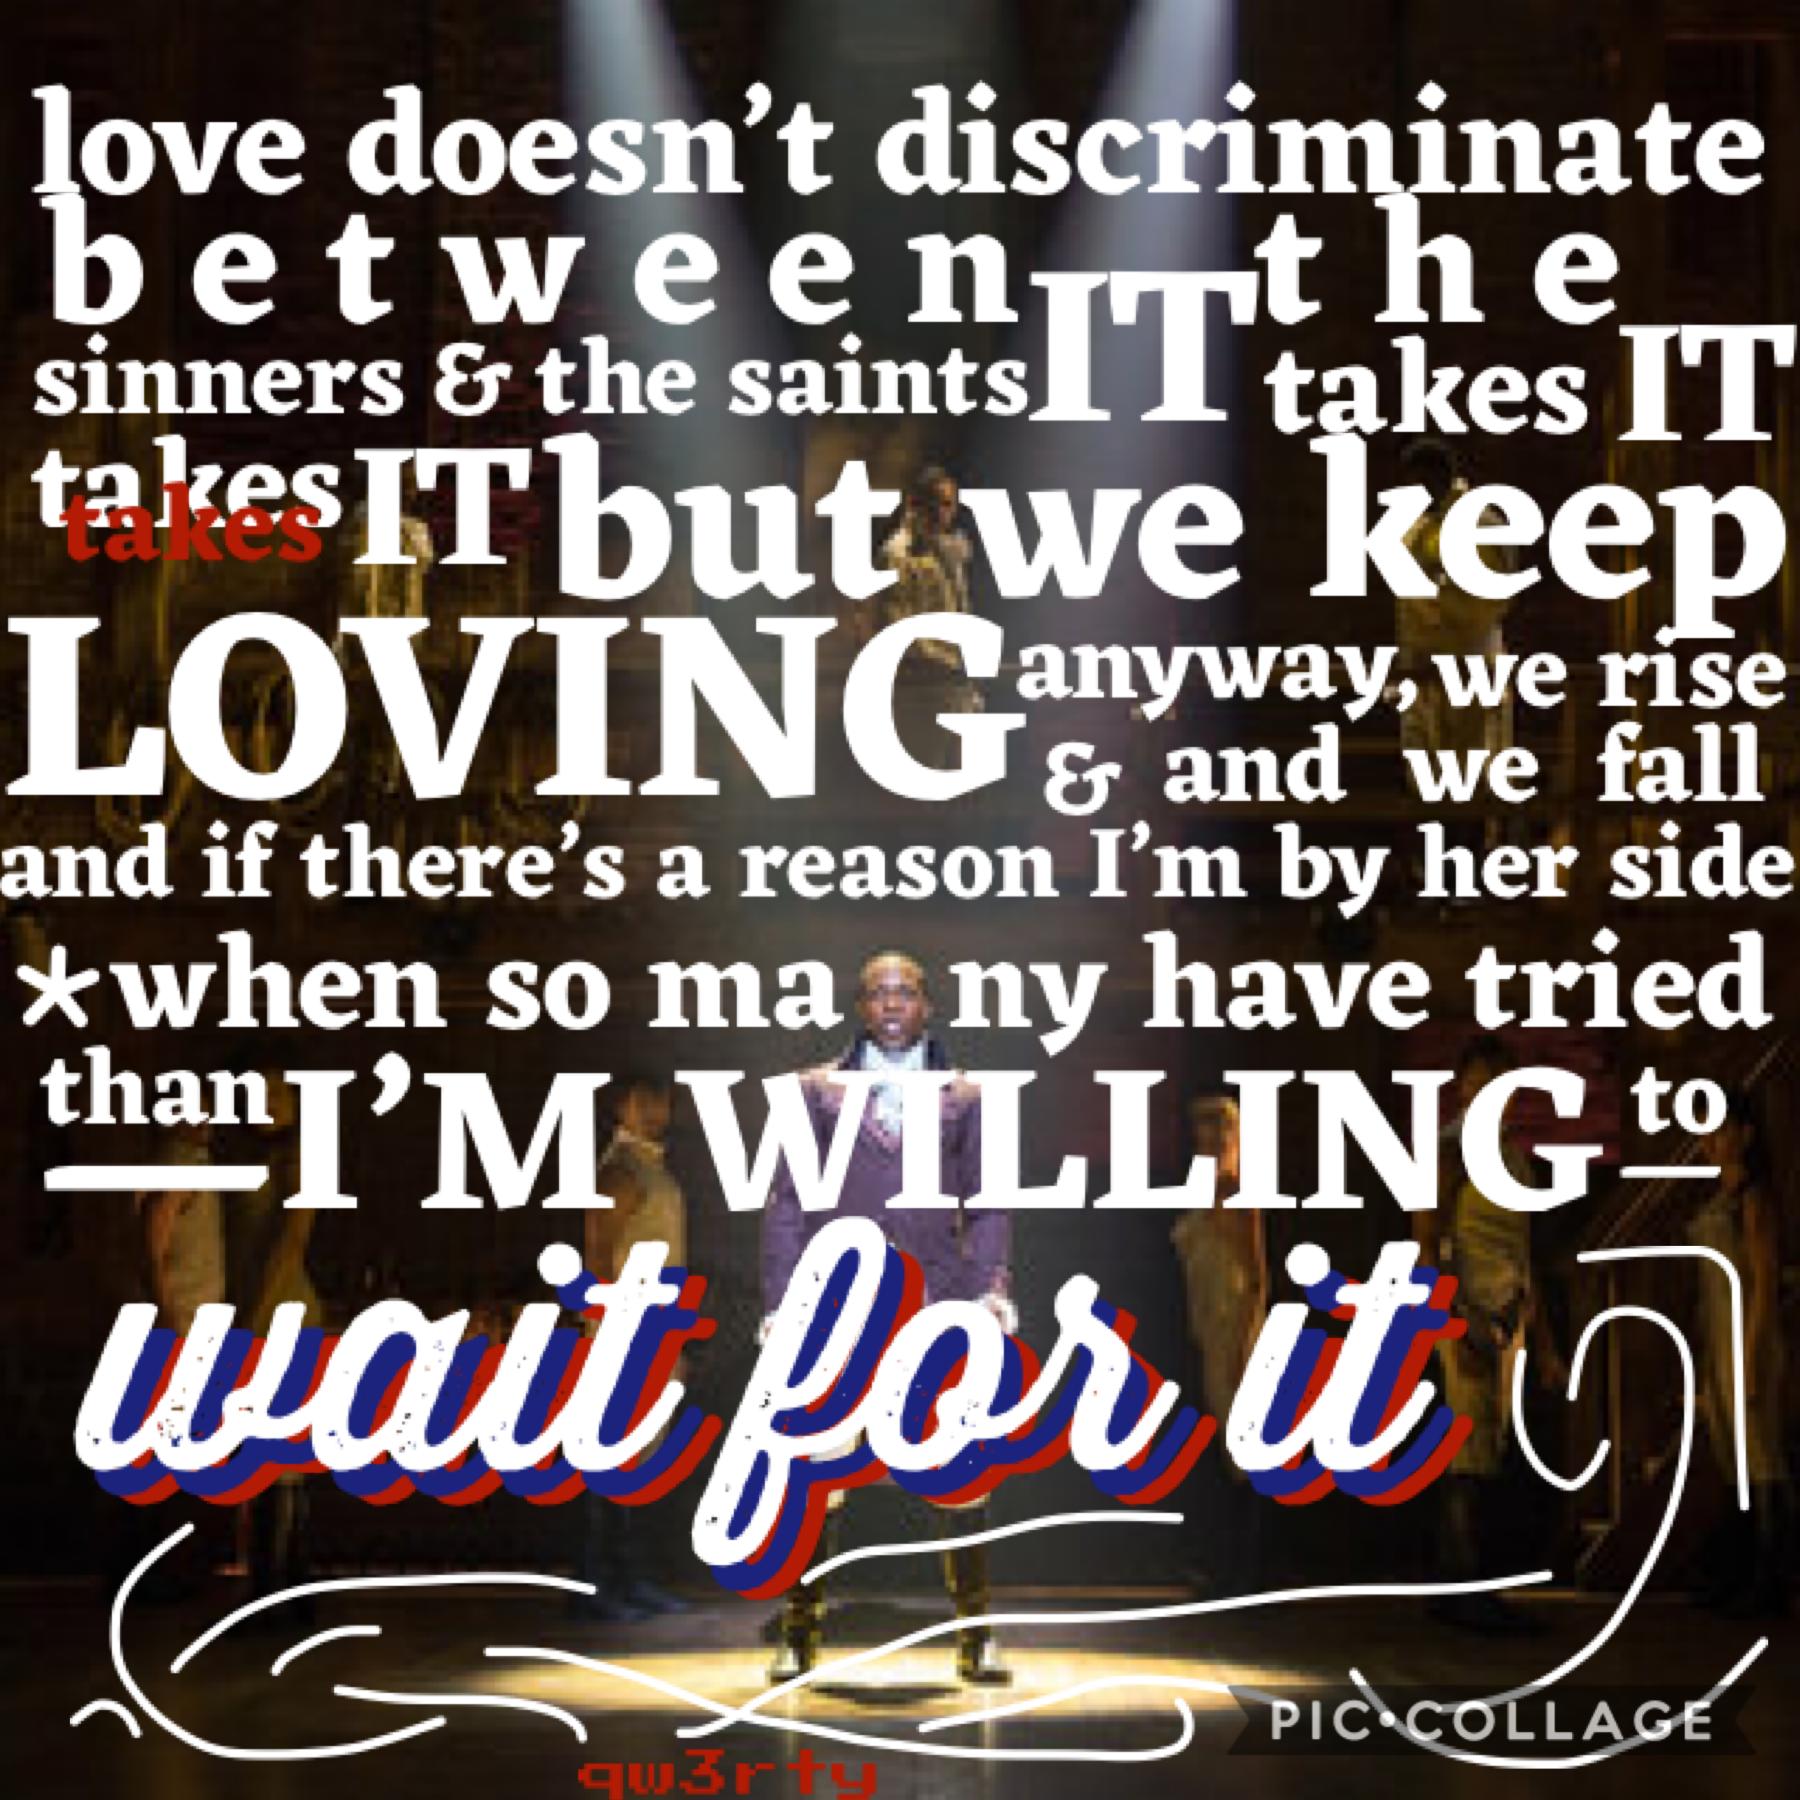 Tap
Wait For It from Hamilton 
Love this song!!! I messed up the lyrics like a dum-dum, but hope y’all like it, I totally recommend this music. 
That’s all, ❤️ Leeli